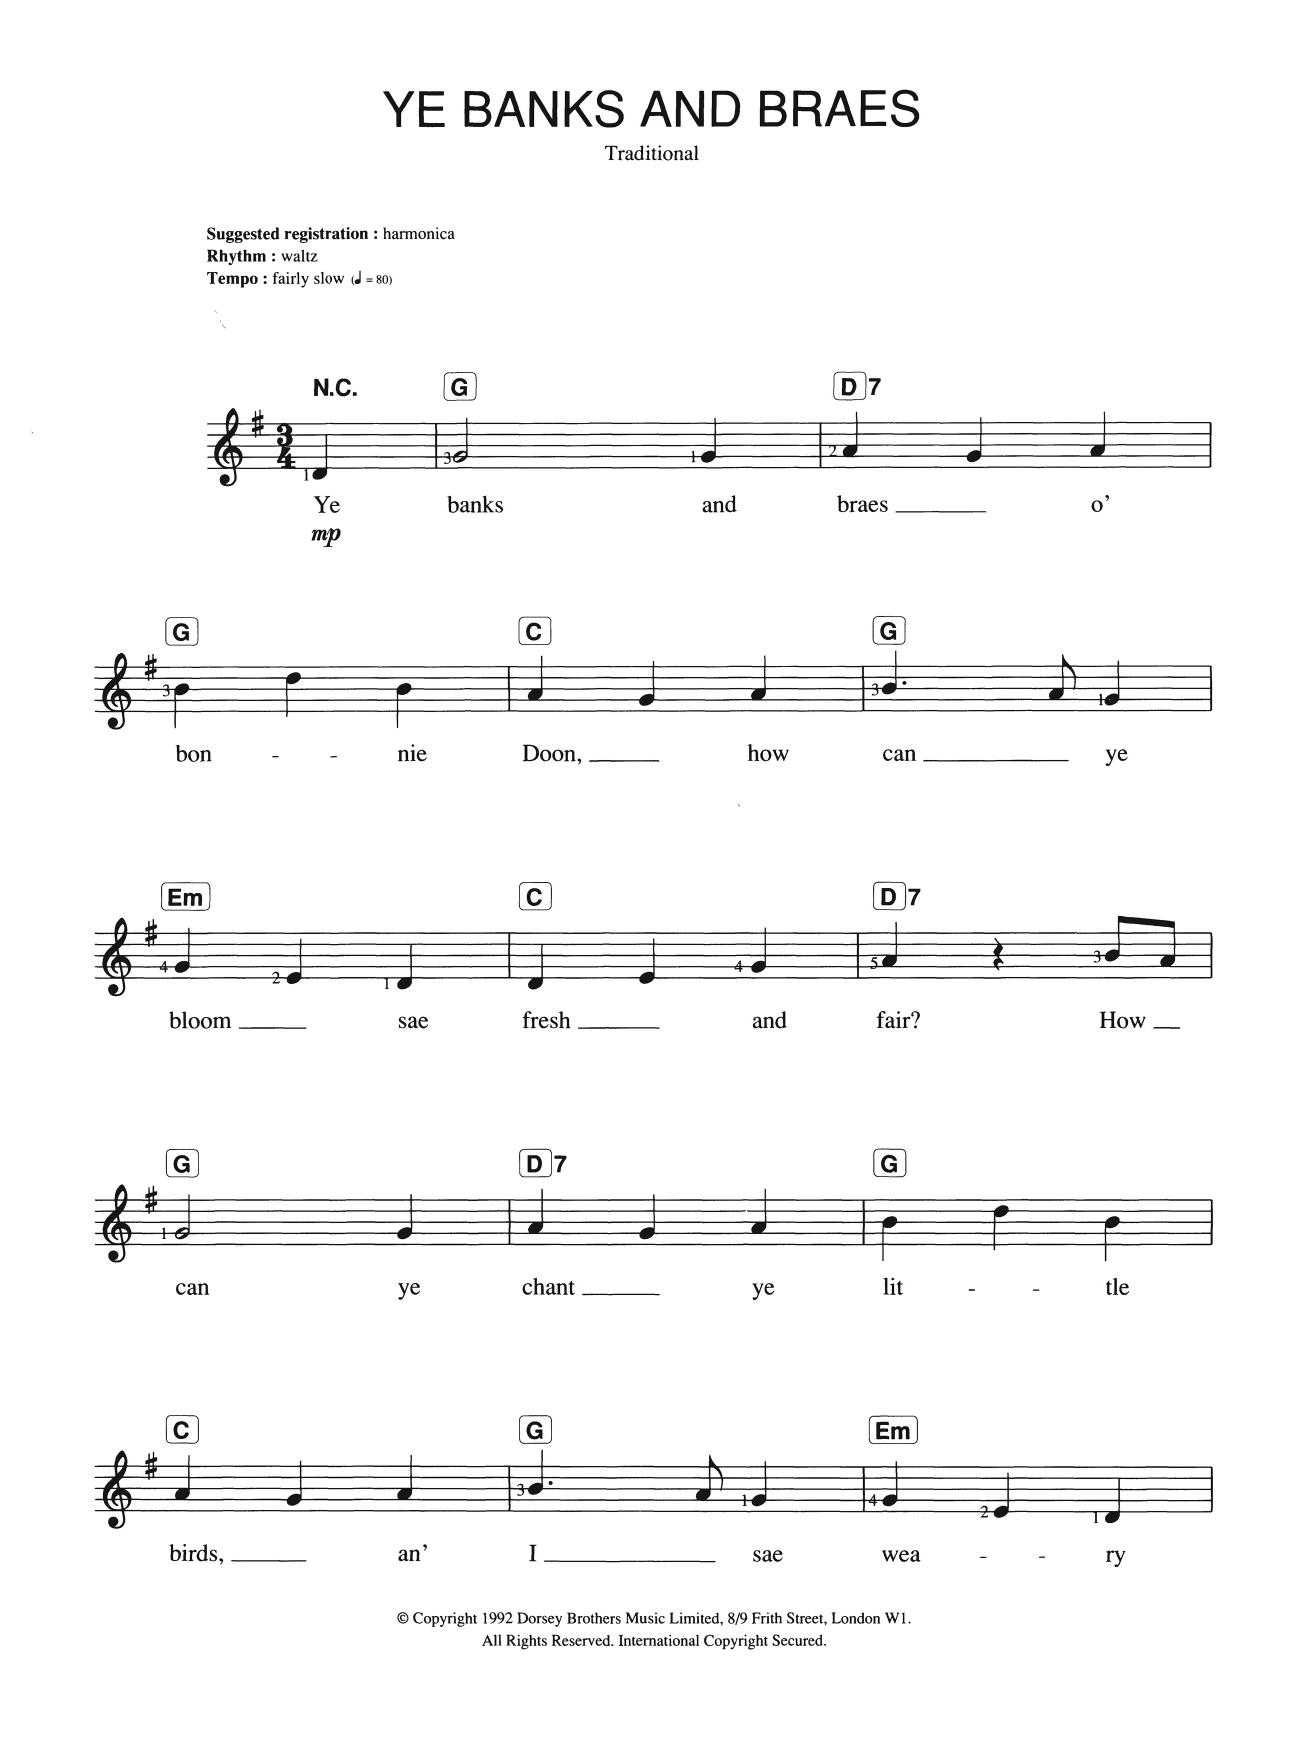 Download Traditional Ye Banks And Braes Sheet Music